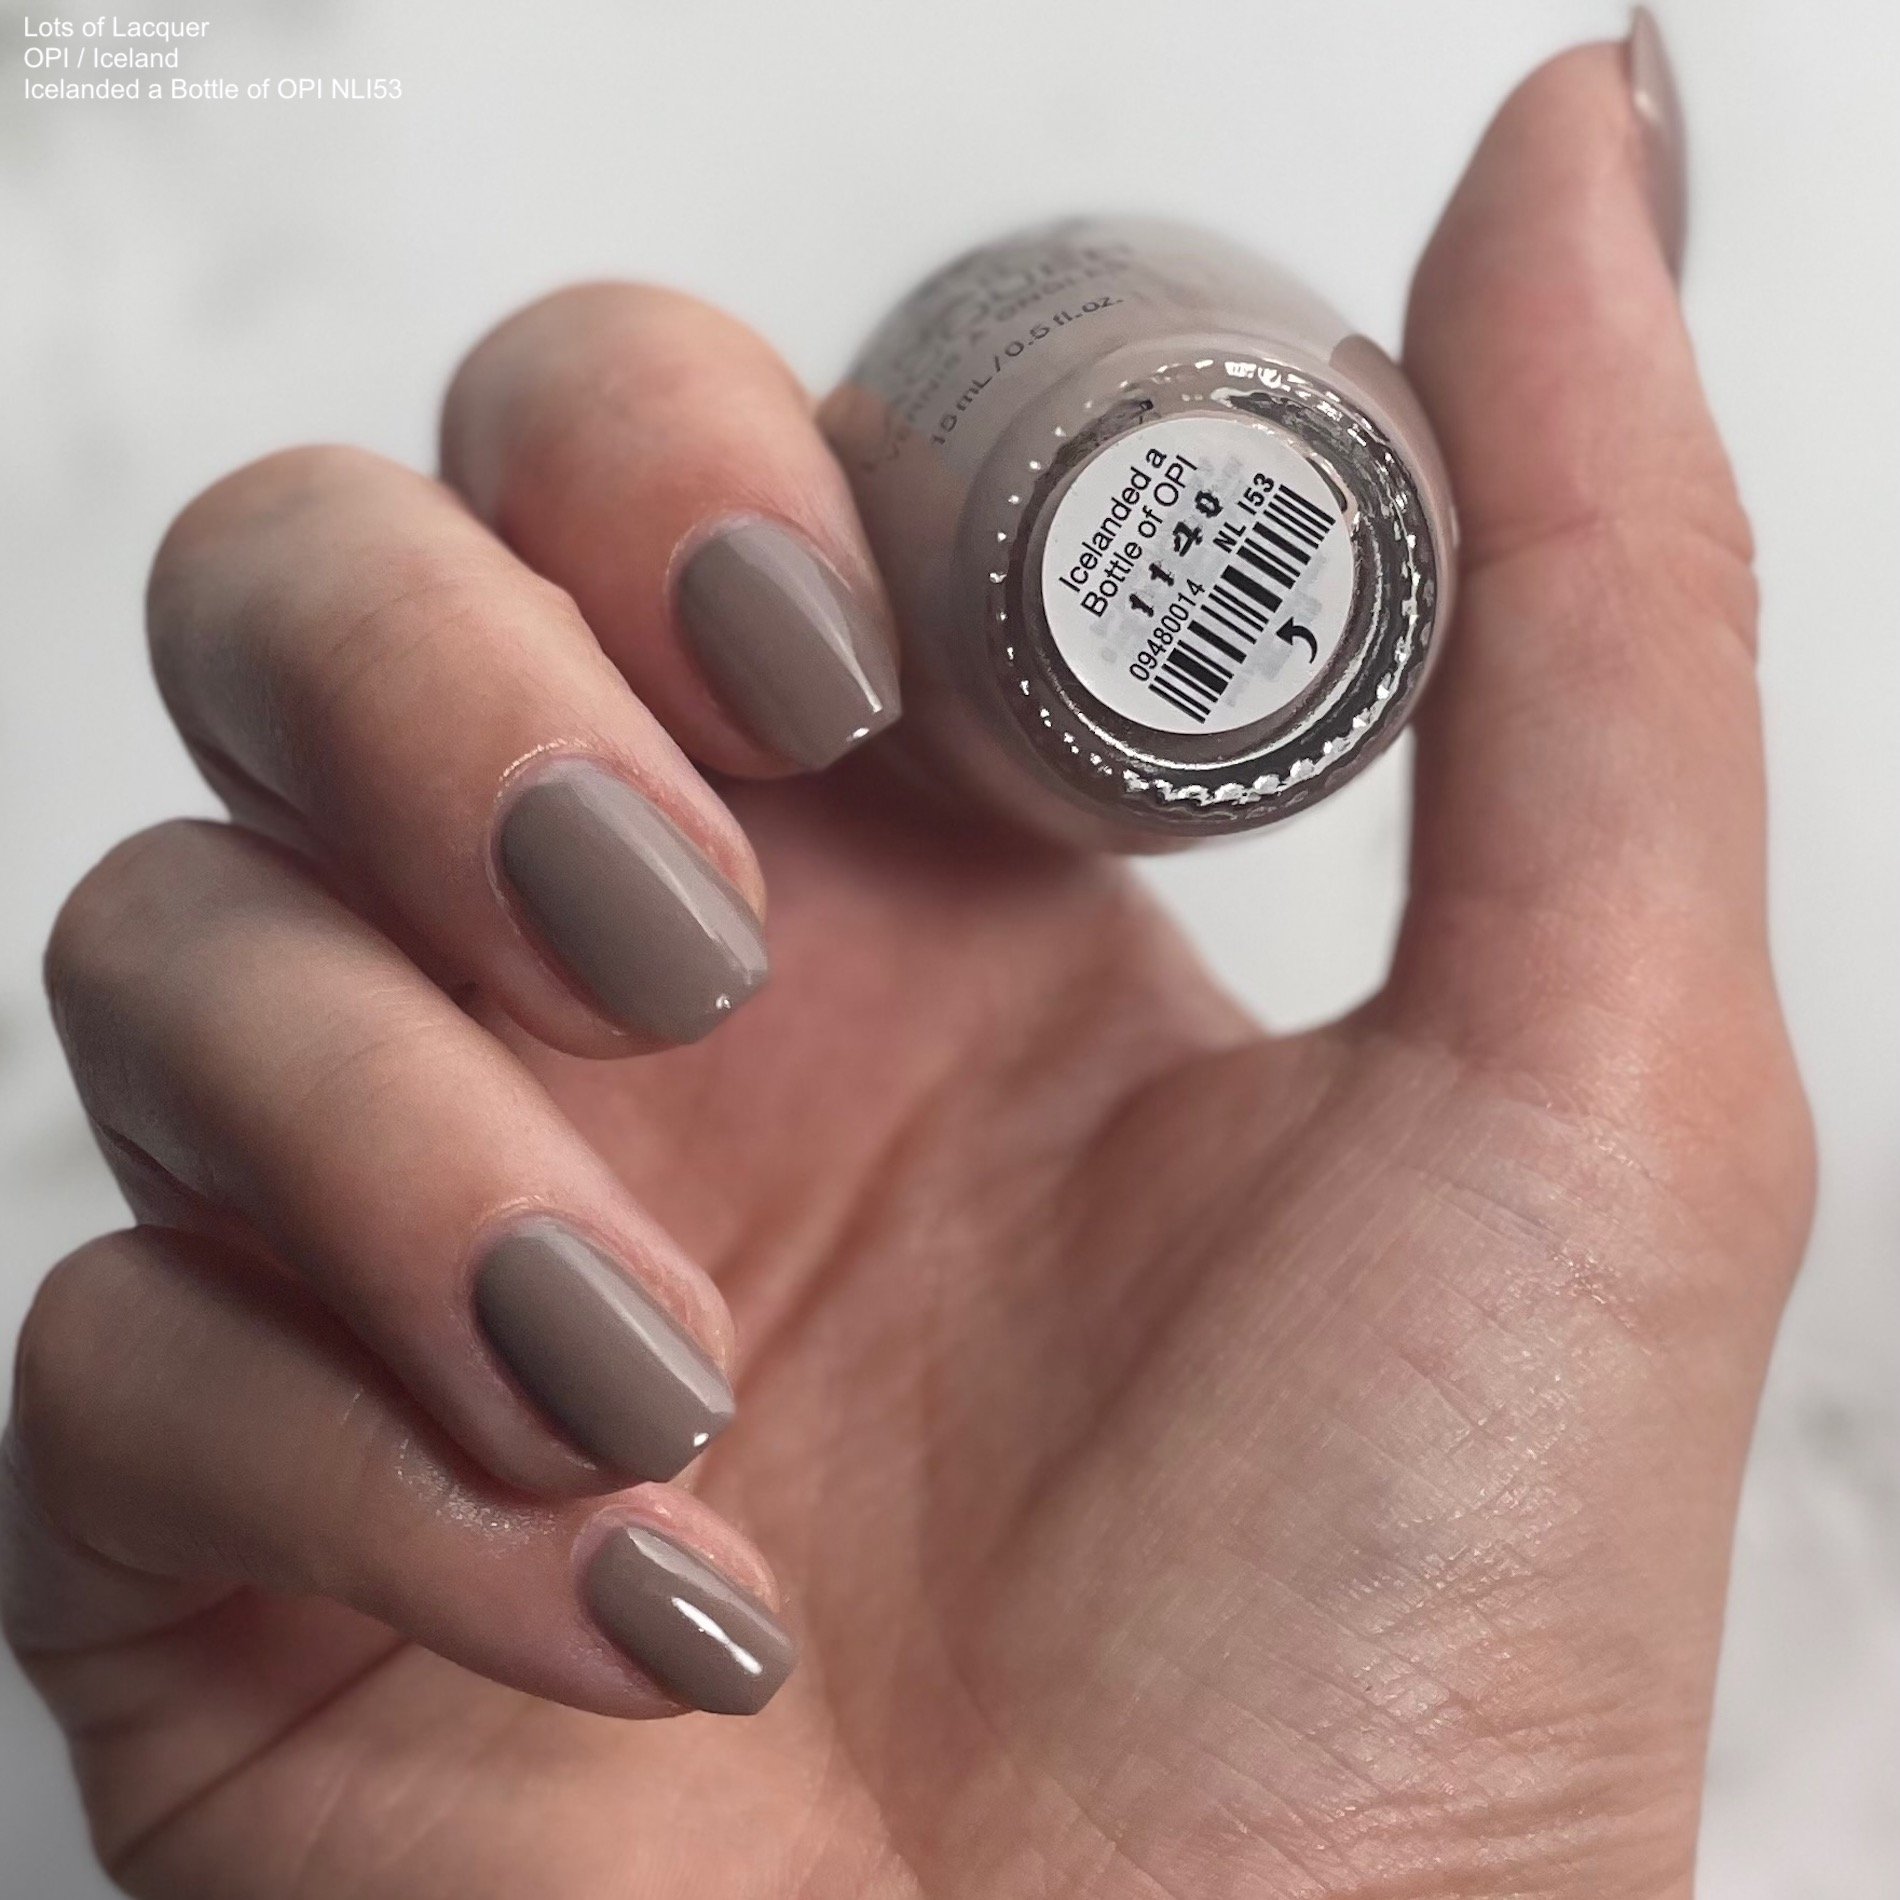 ILNP Tan Lines - Sandy Taupe Speckled Nail Polish